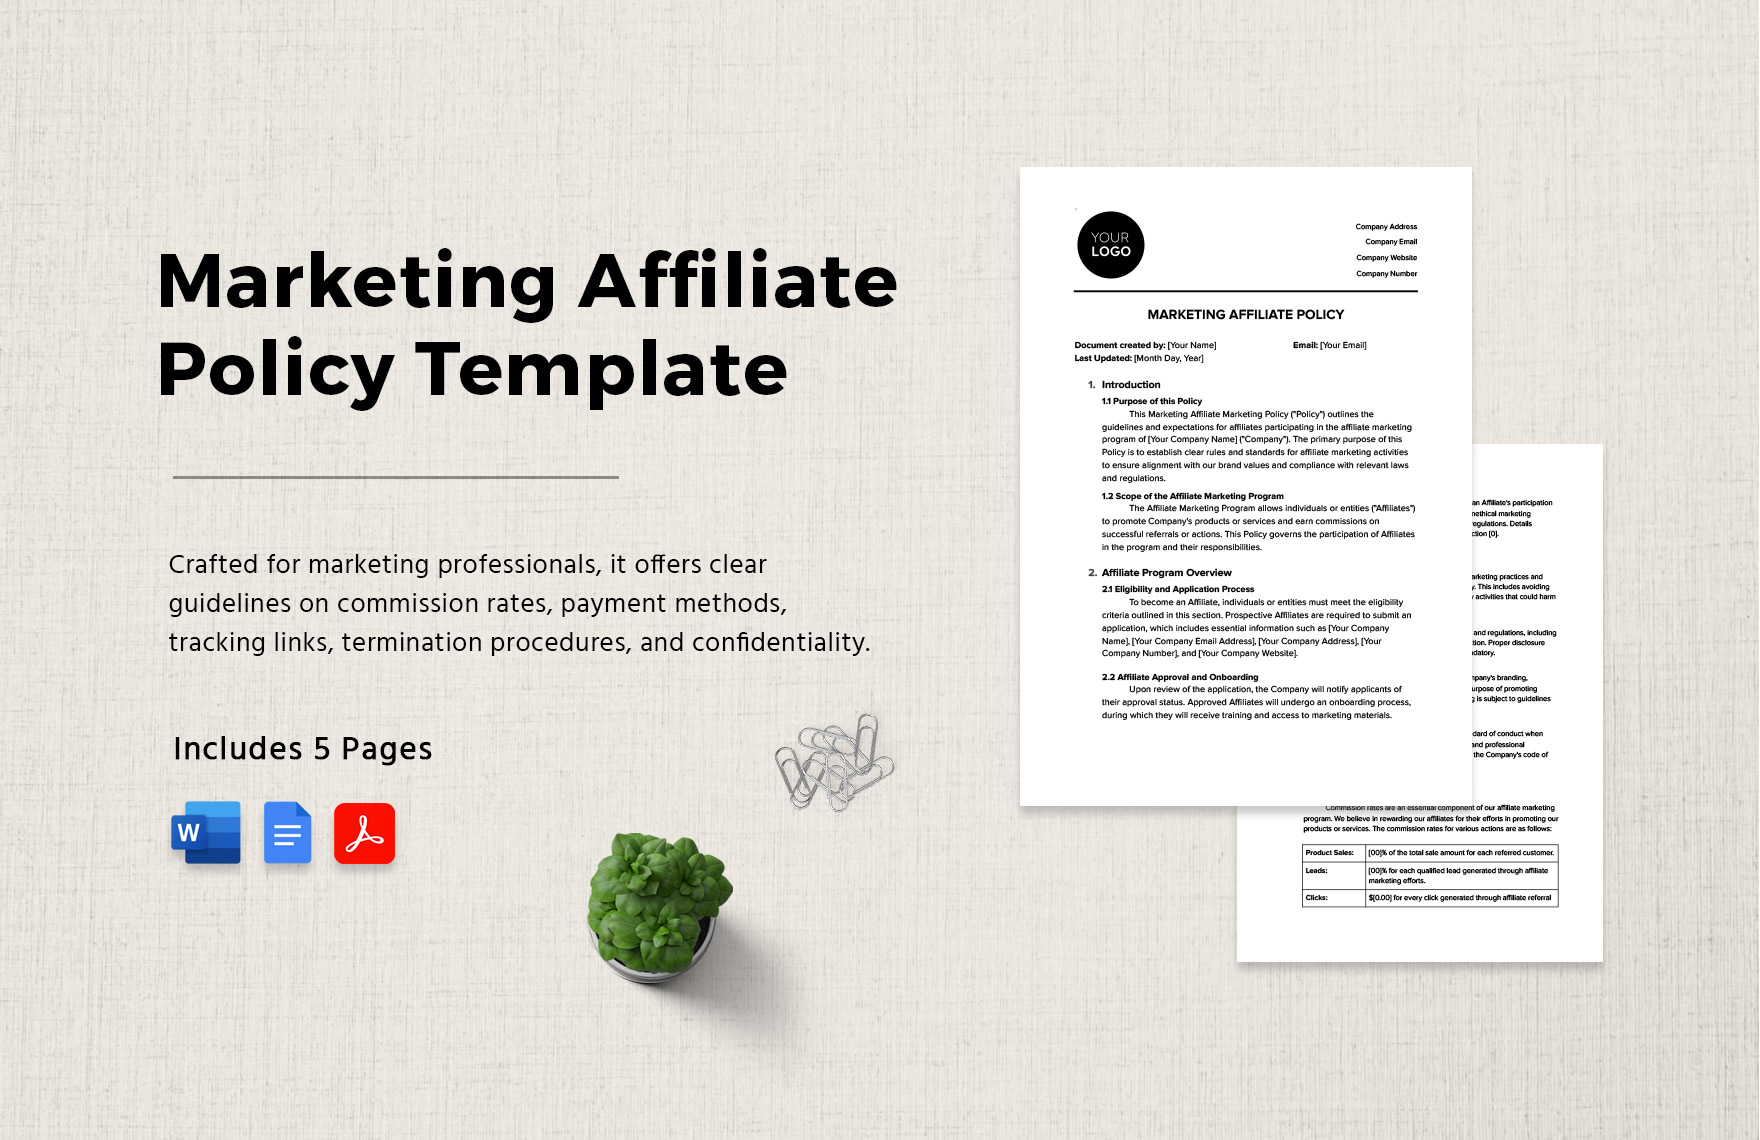 Marketing Affiliate Policy Template in Word, Google Docs, PDF